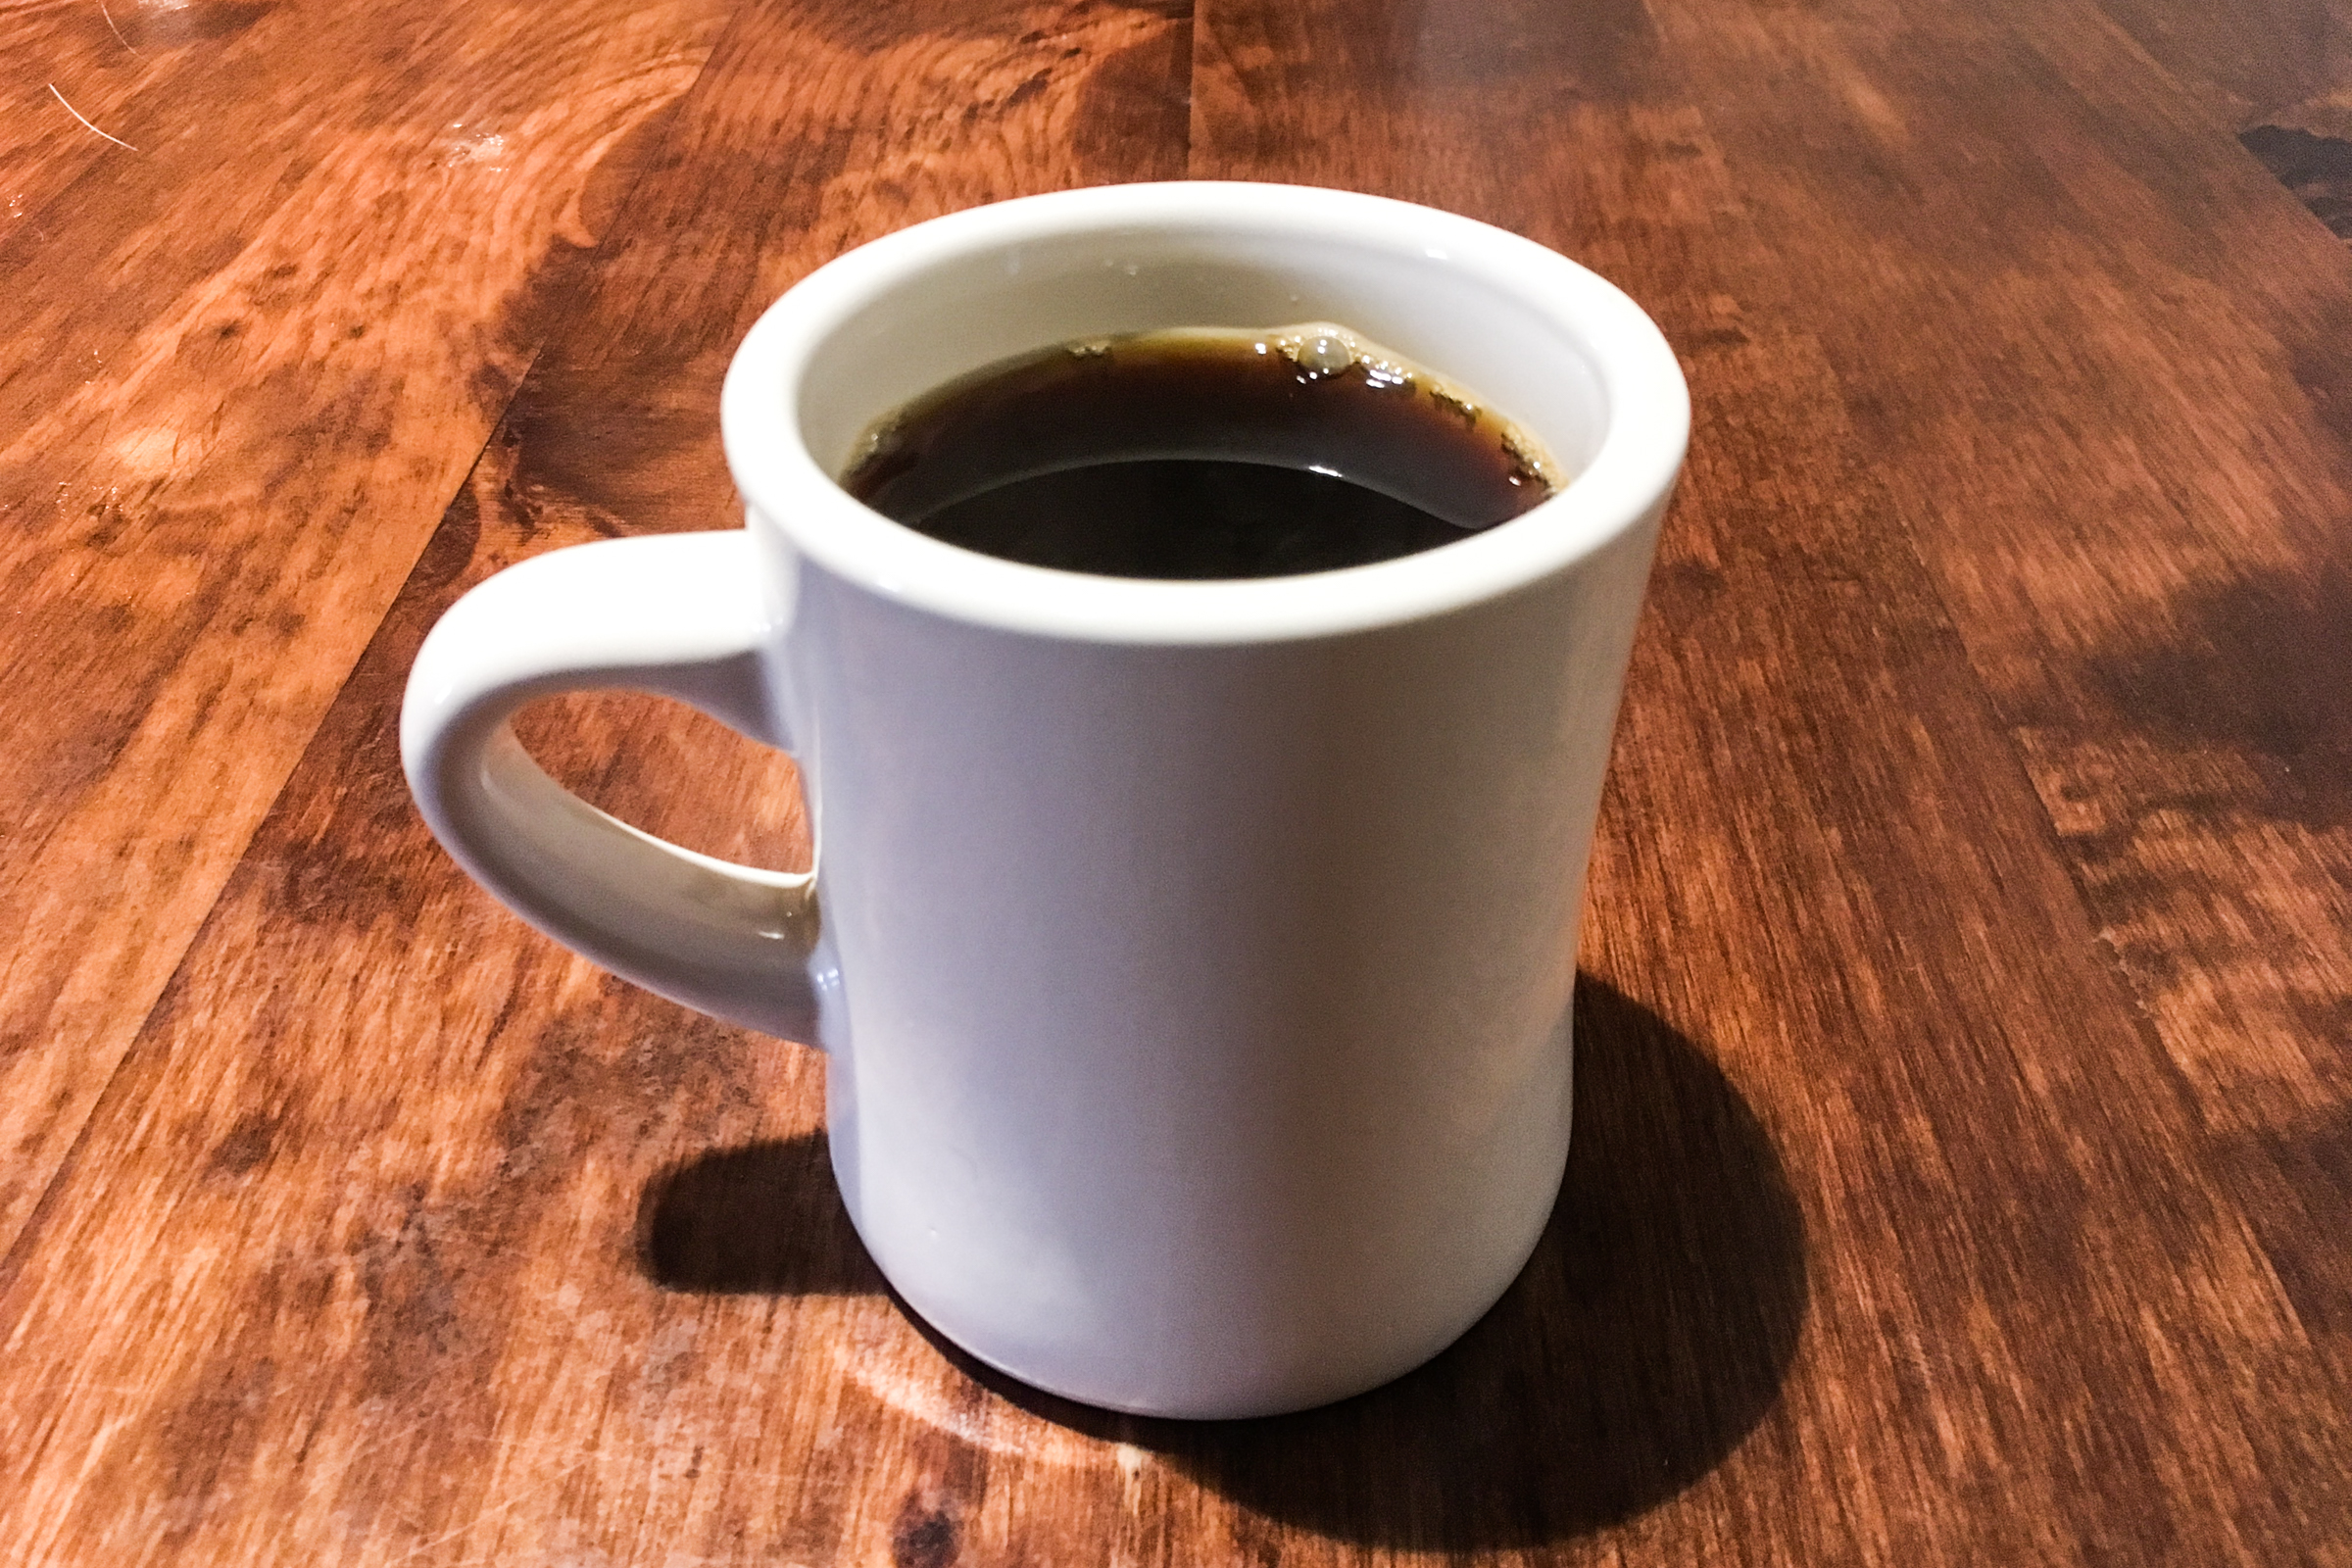 Make That Special Cup Of Coffee By Completely Tweaking The Coffee